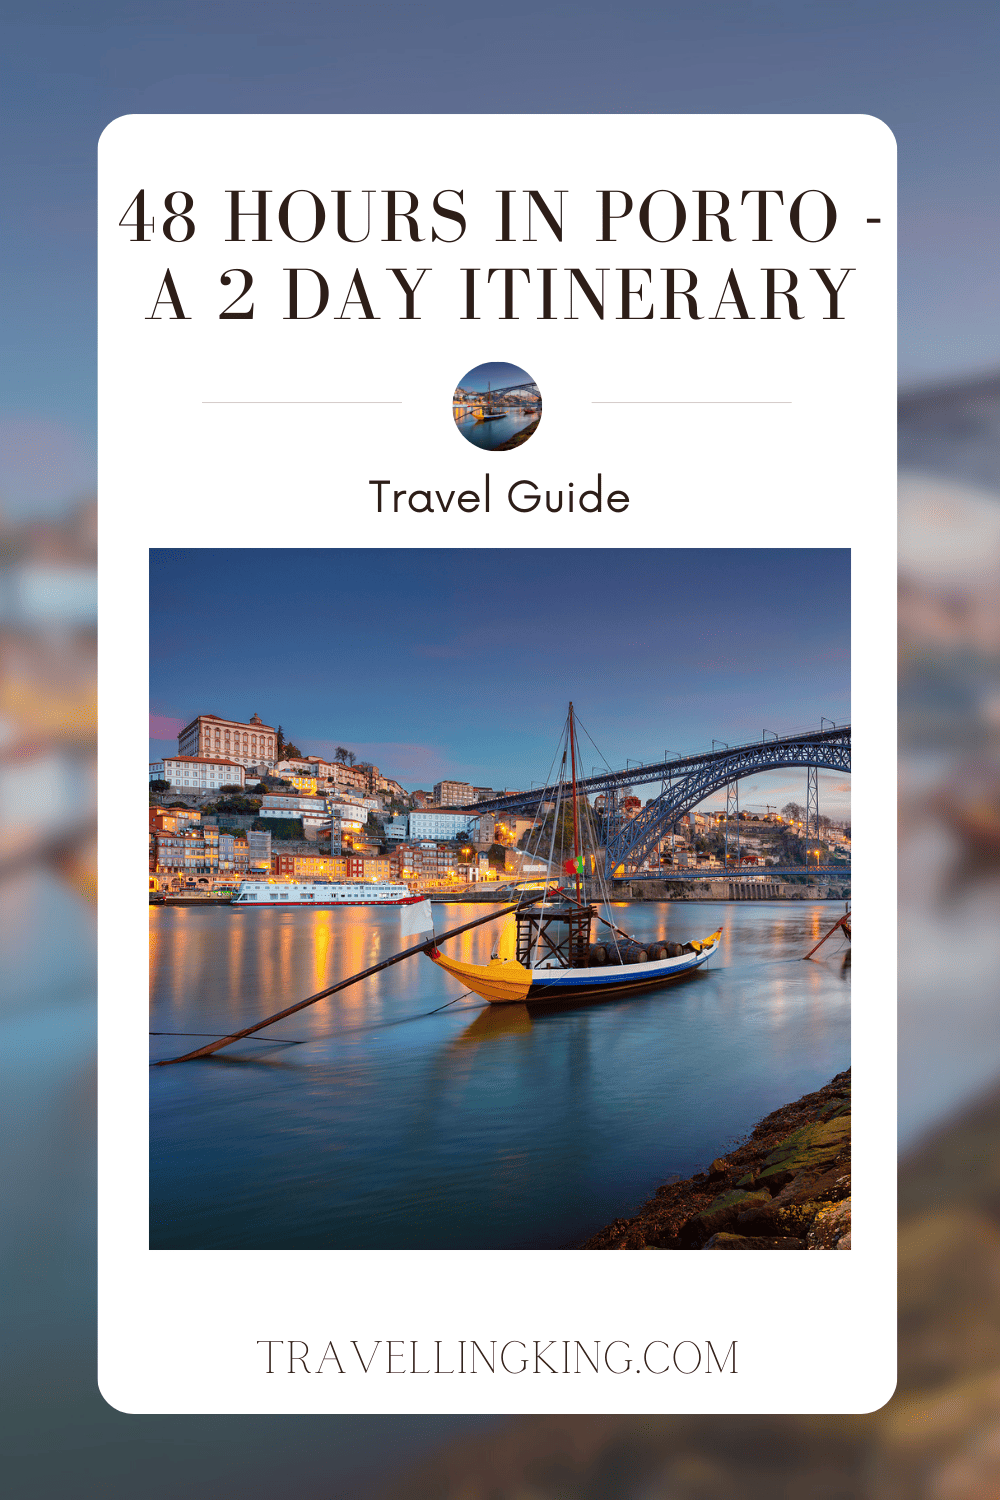 48 hours in Porto - A 2 day Itinerary